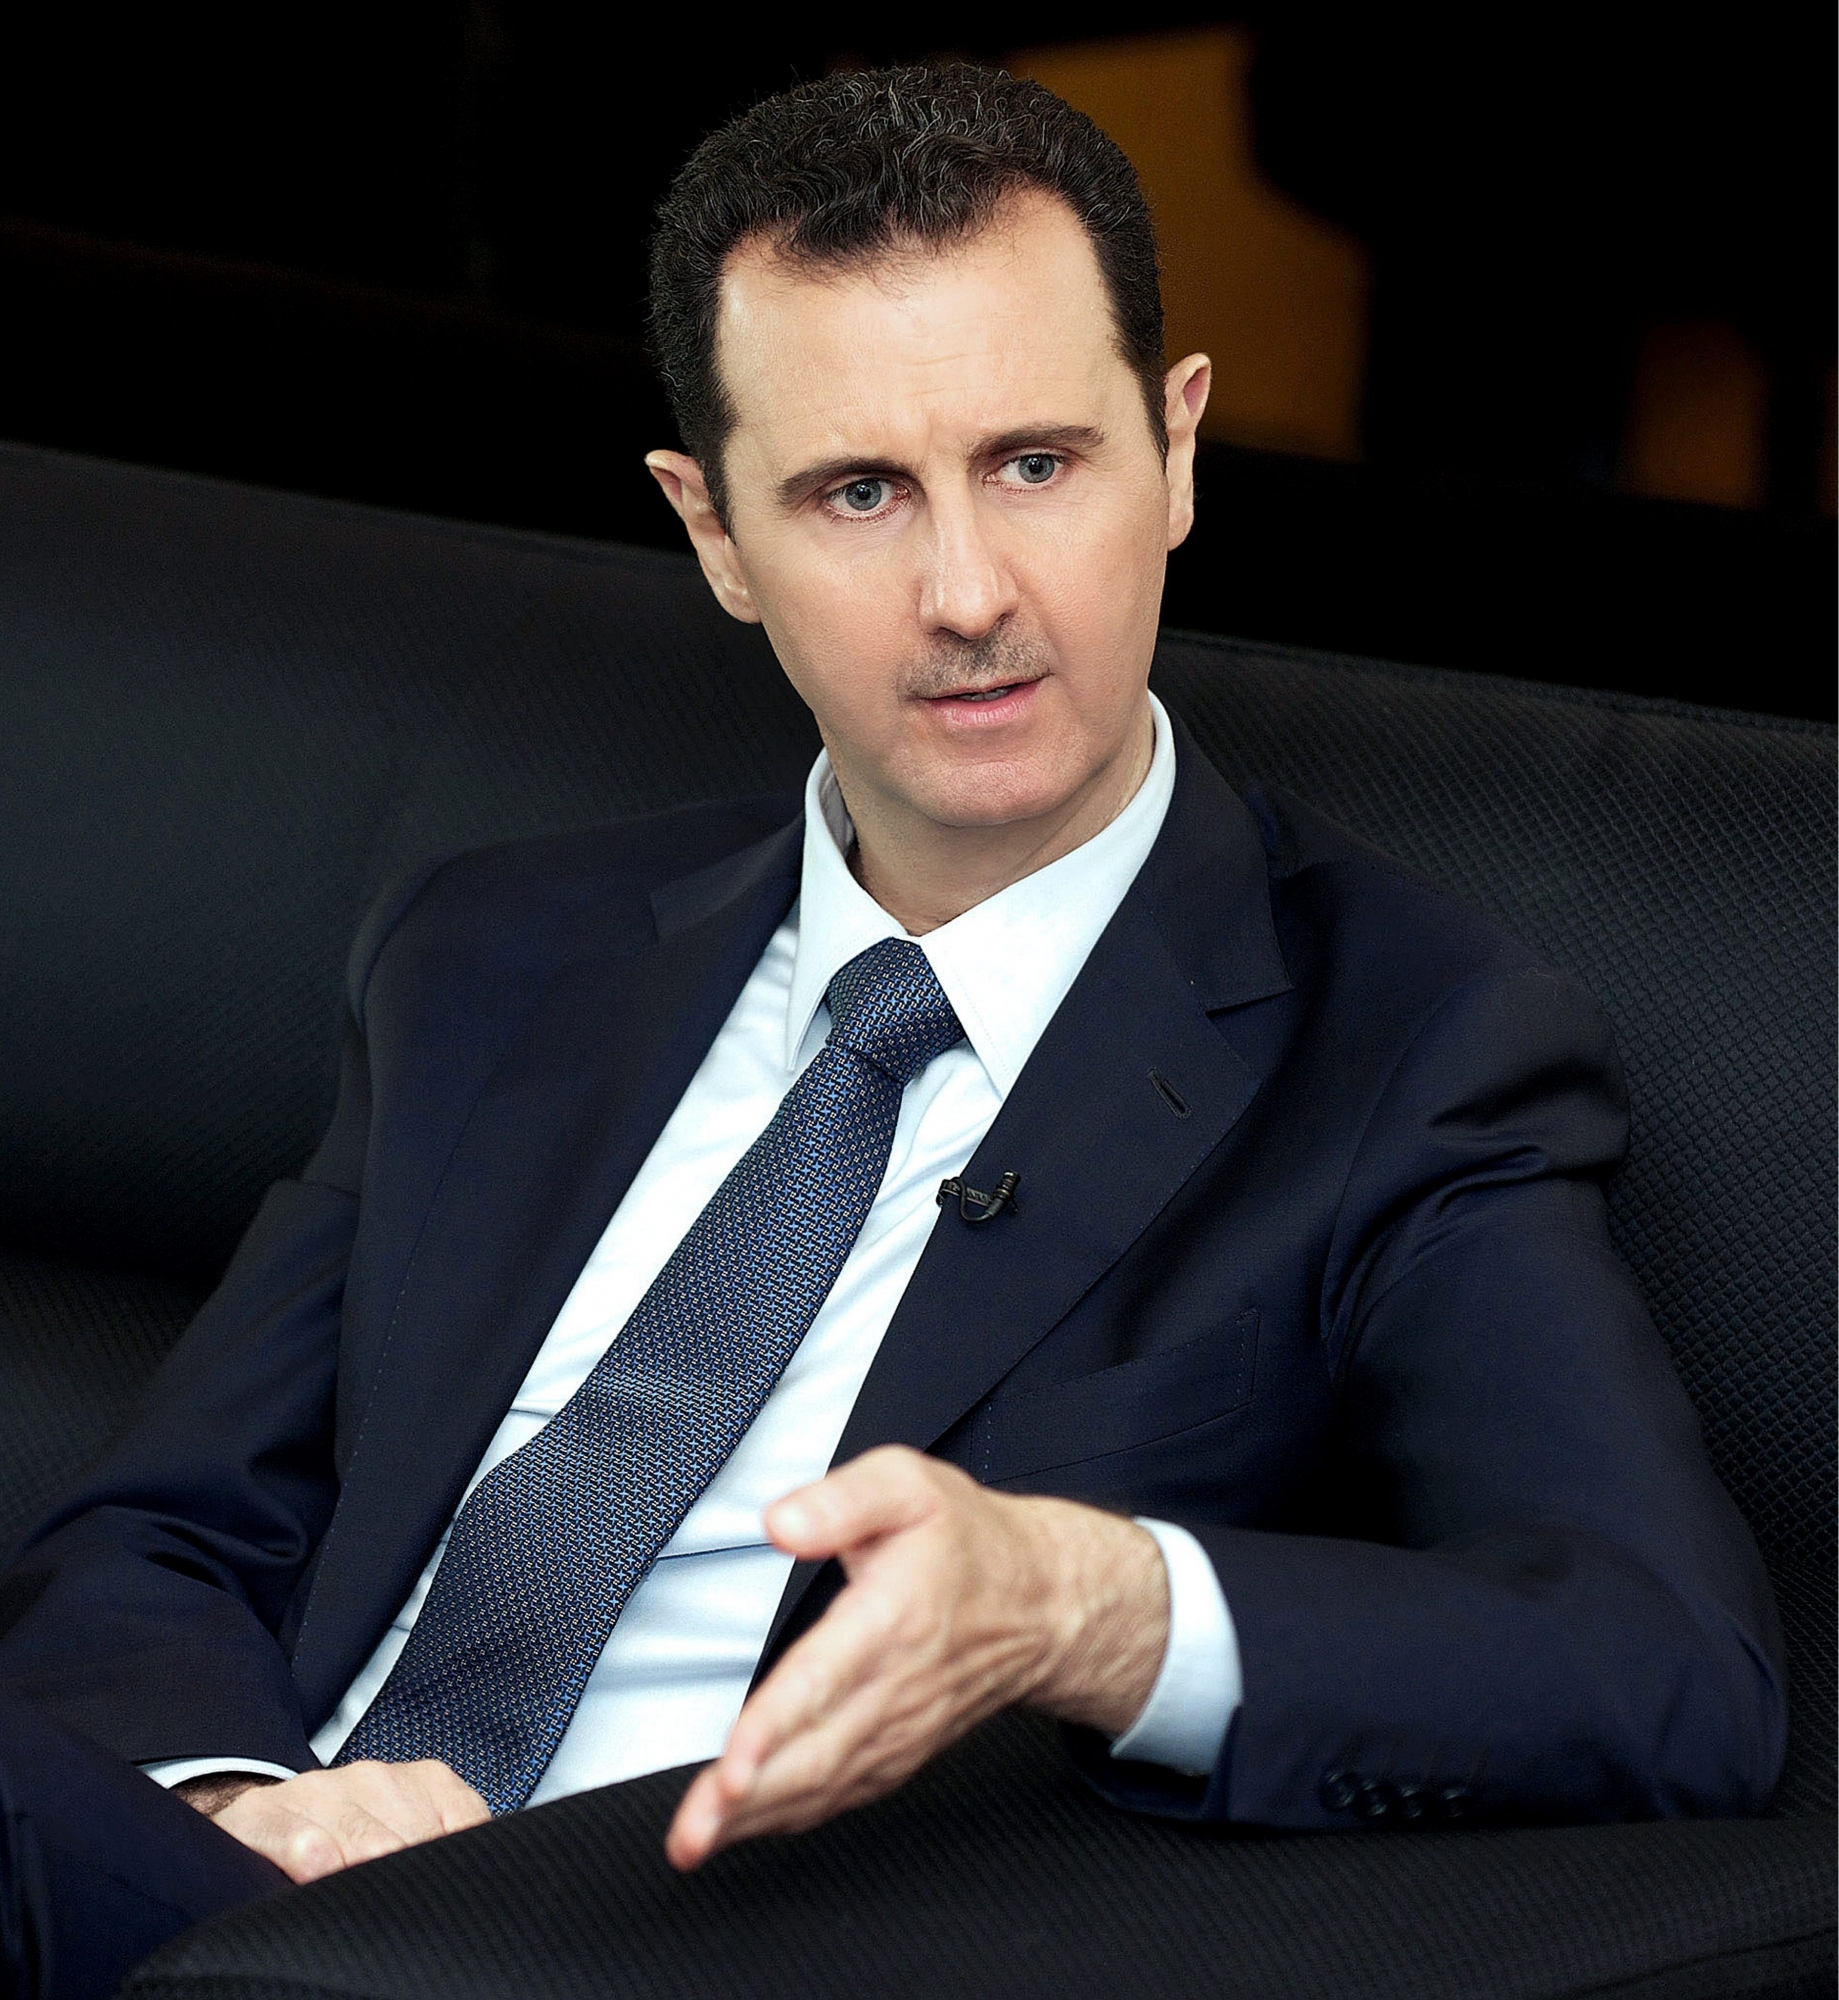 epa03900410 A handout picture made available 07 October 2013 by the Syrian Arab News Agency (SANA) shows Syrian President Bashar al-Assad speaking during an interview with the German Der Spiegel News Magazine in Damascus, Syria, 02 October 2013. Al-Assad, who is facing an unprecedented uprising against his rule, admitted in an interview with the Germany magazine Der Spiegel that he and his regime have made mistakes but added his government "has no other option than to believe in our victory." He also was quoted as saying that the West would sooner believe the al-Qaeda terrorist network than him.  EPA/SANA HANDOUT  HANDOUT EDITORIAL USE ONLY/NO SALES SYRIEN KONFLIKT ASSAD INTERVIEW